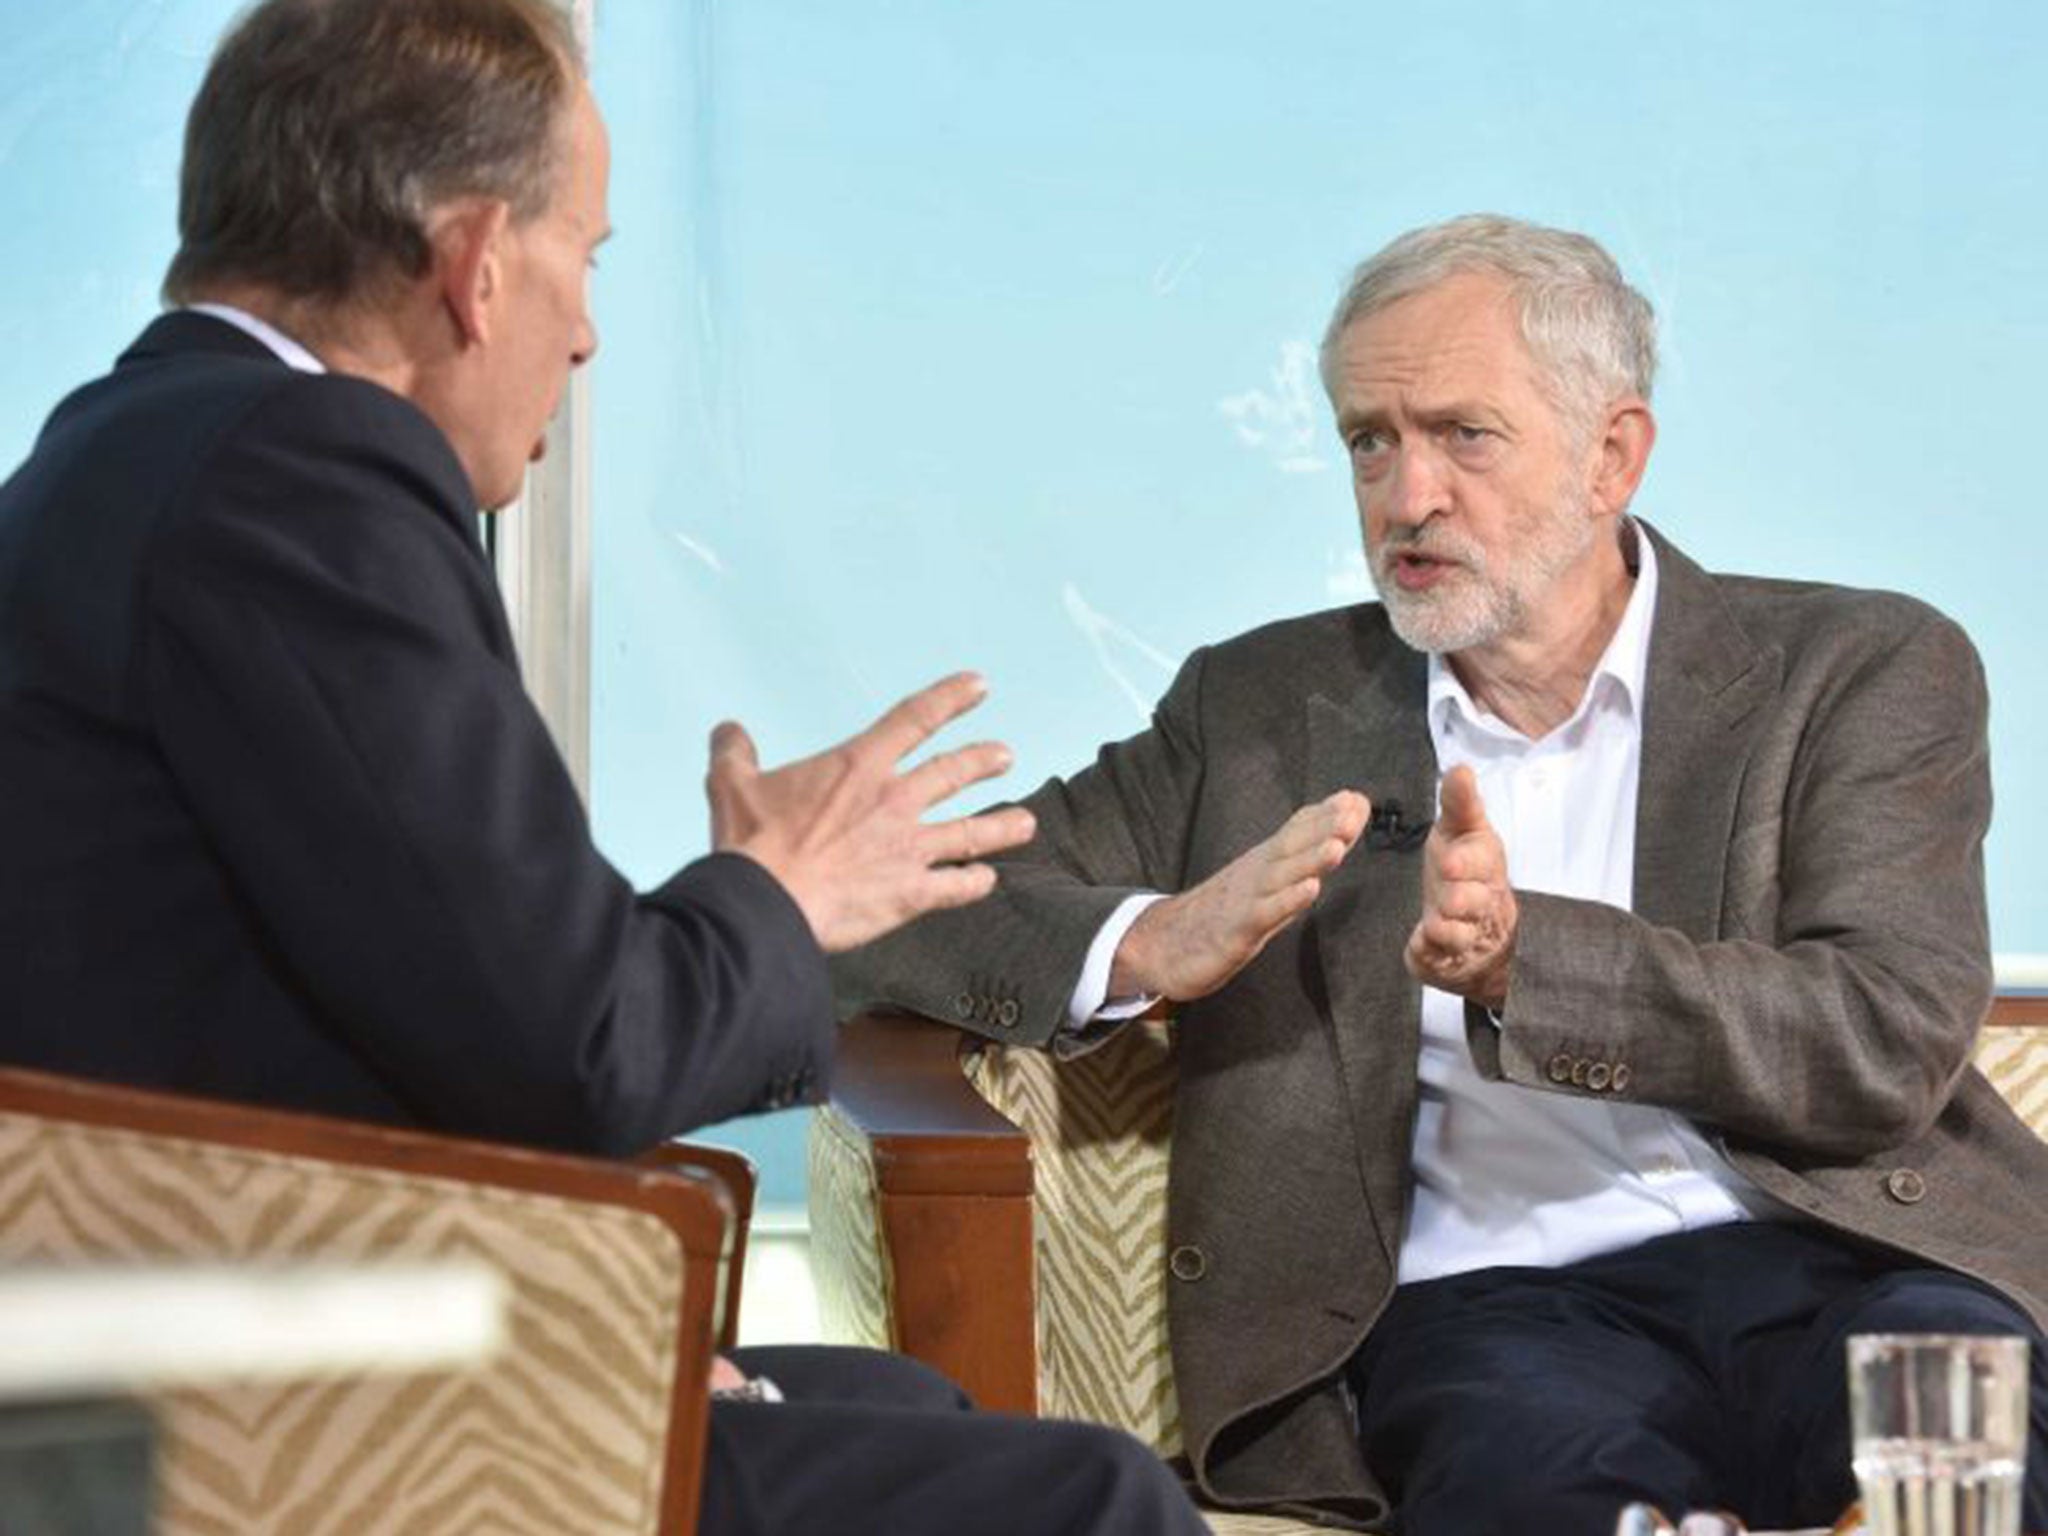 Andrew Marr interviews Jeremy Corbyn on the flagship BBC show